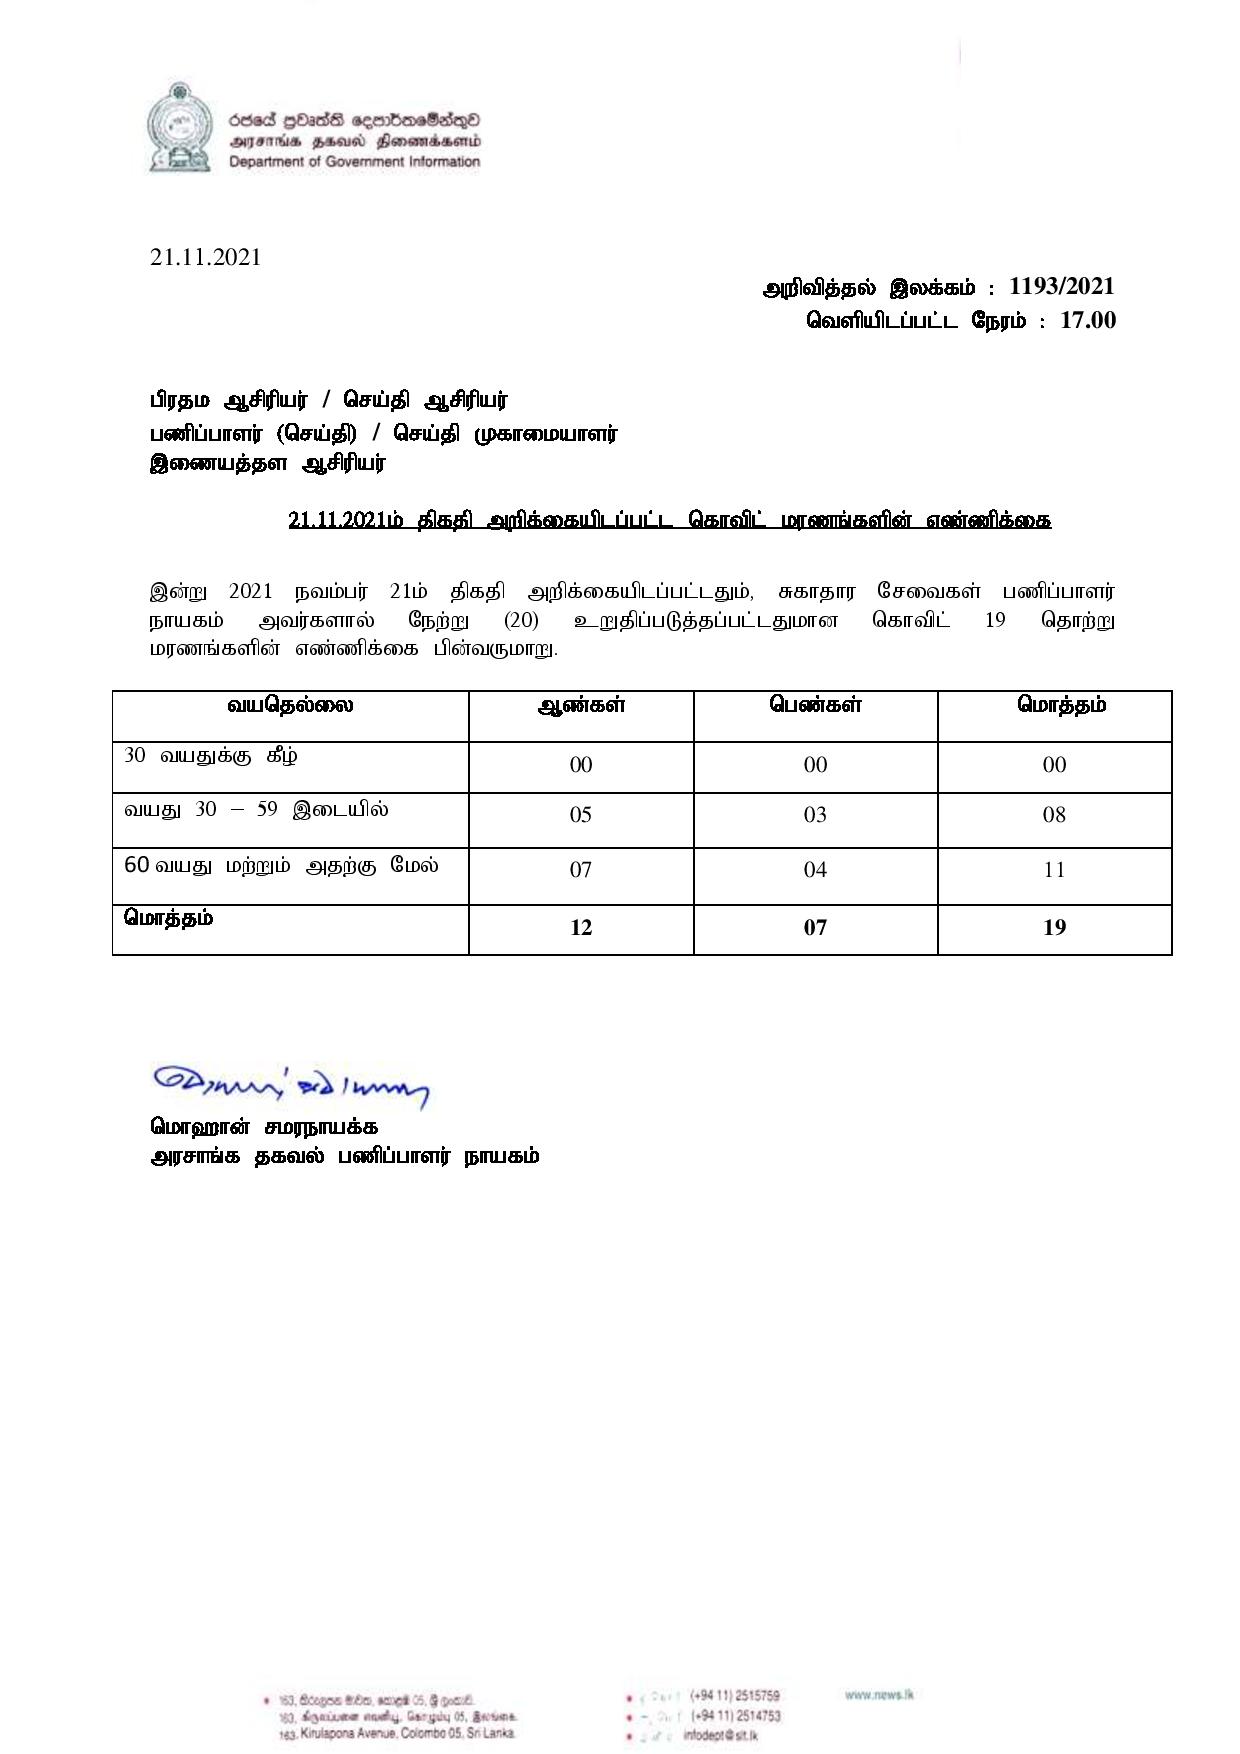 Release No 1193 Tamil page 001